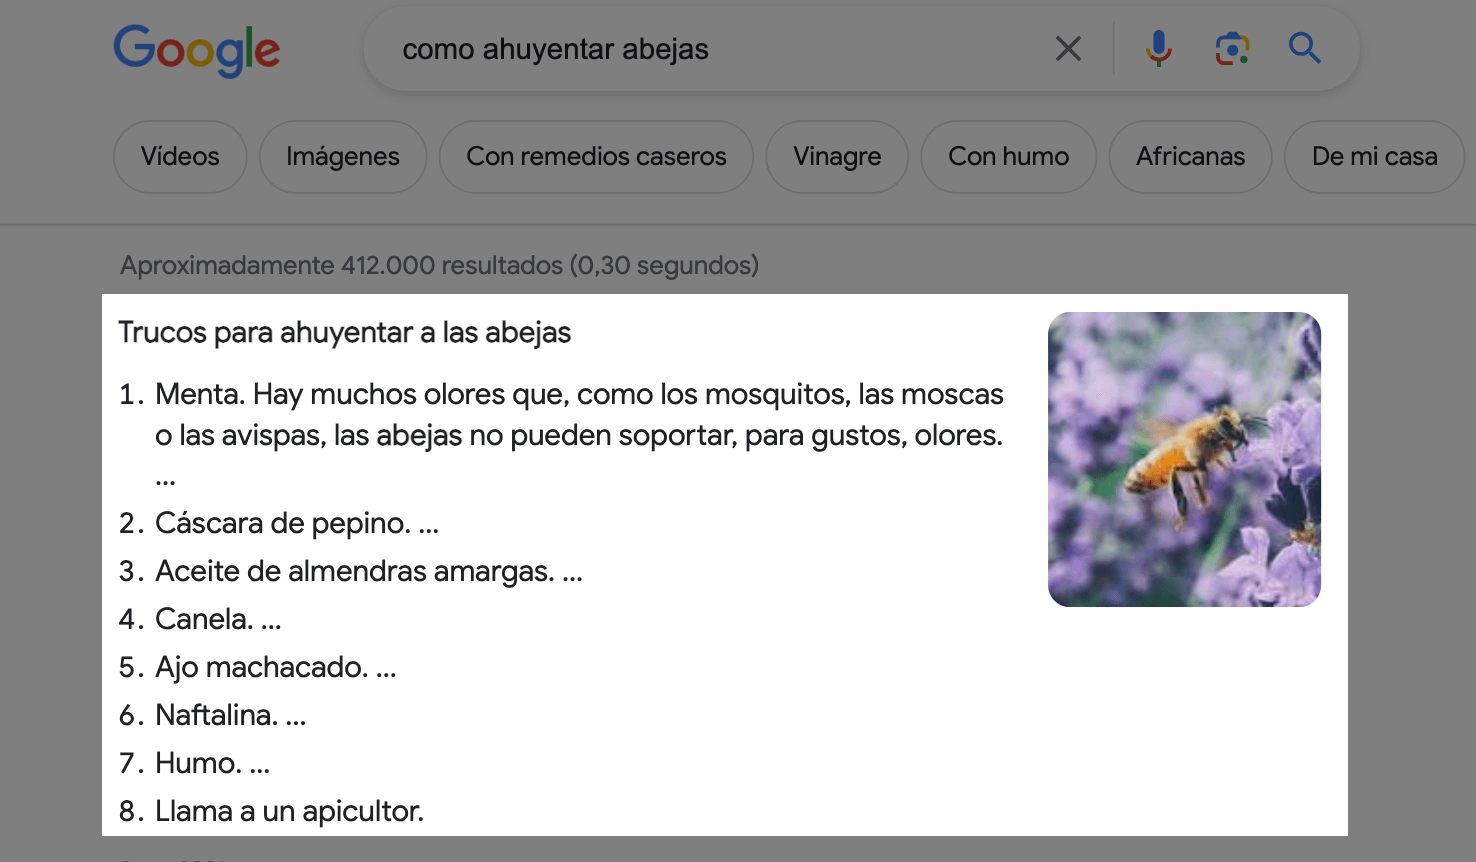 Ejemplo Featured Snippet "como ahuyentar abejas"